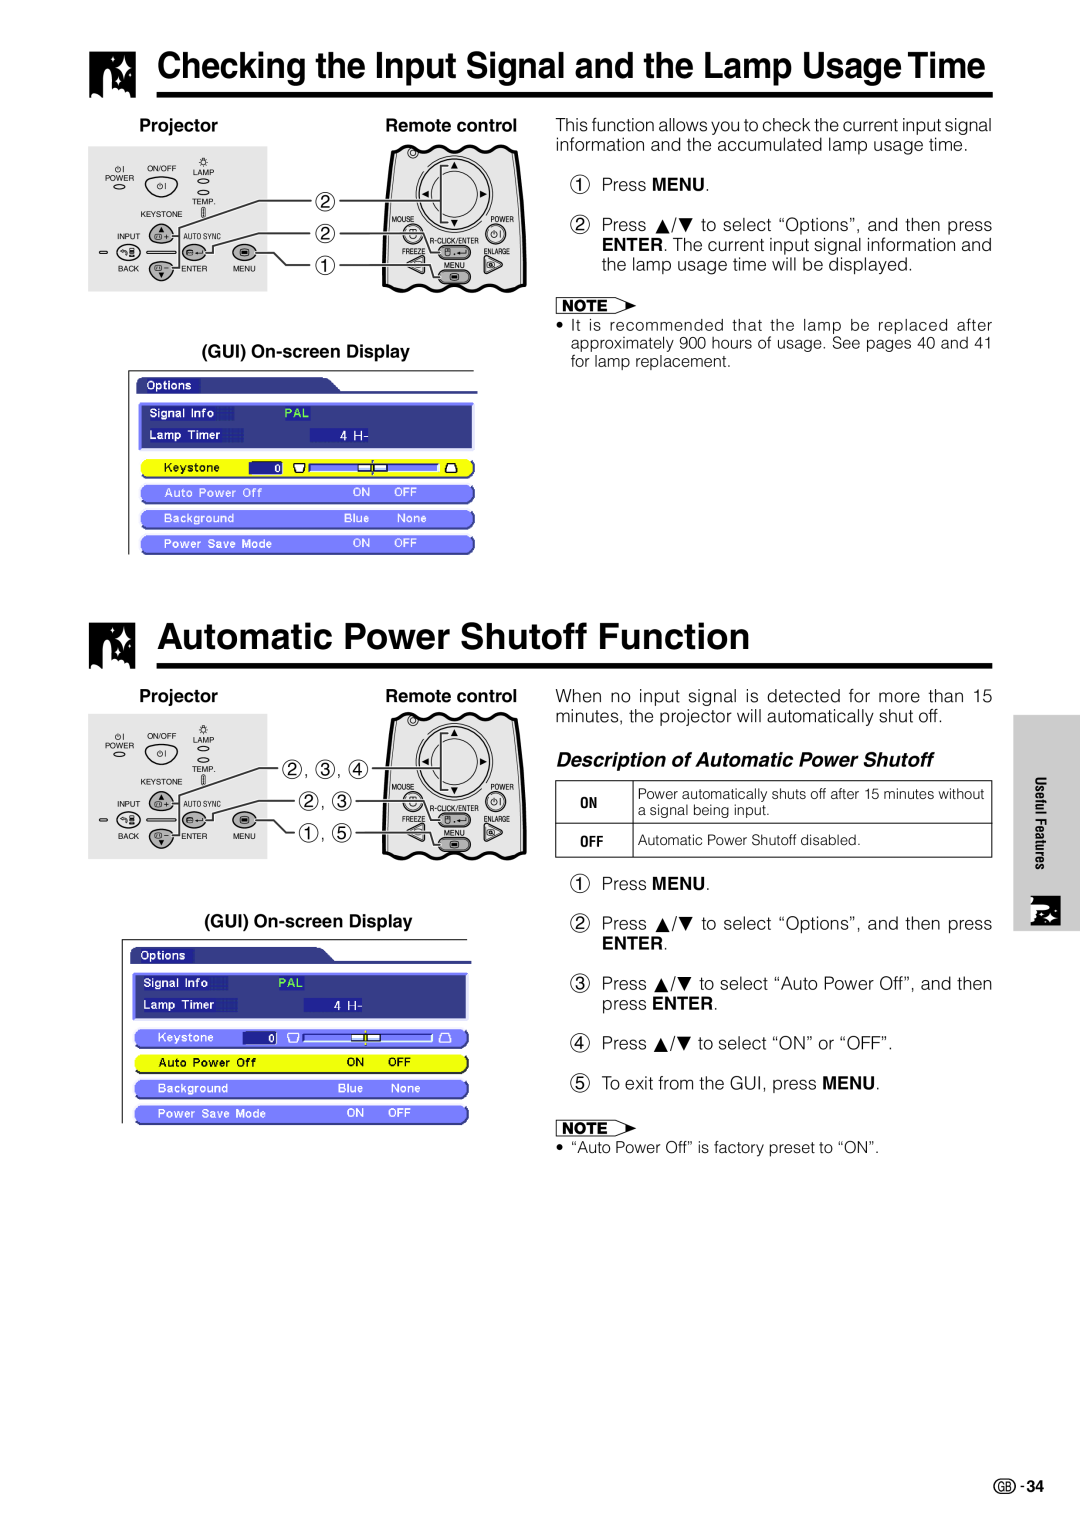 Sharp PG-C20XE Automatic Power Shutoff Function, Checking the Input Signal and the Lamp Usage Time, Projector, Enter 